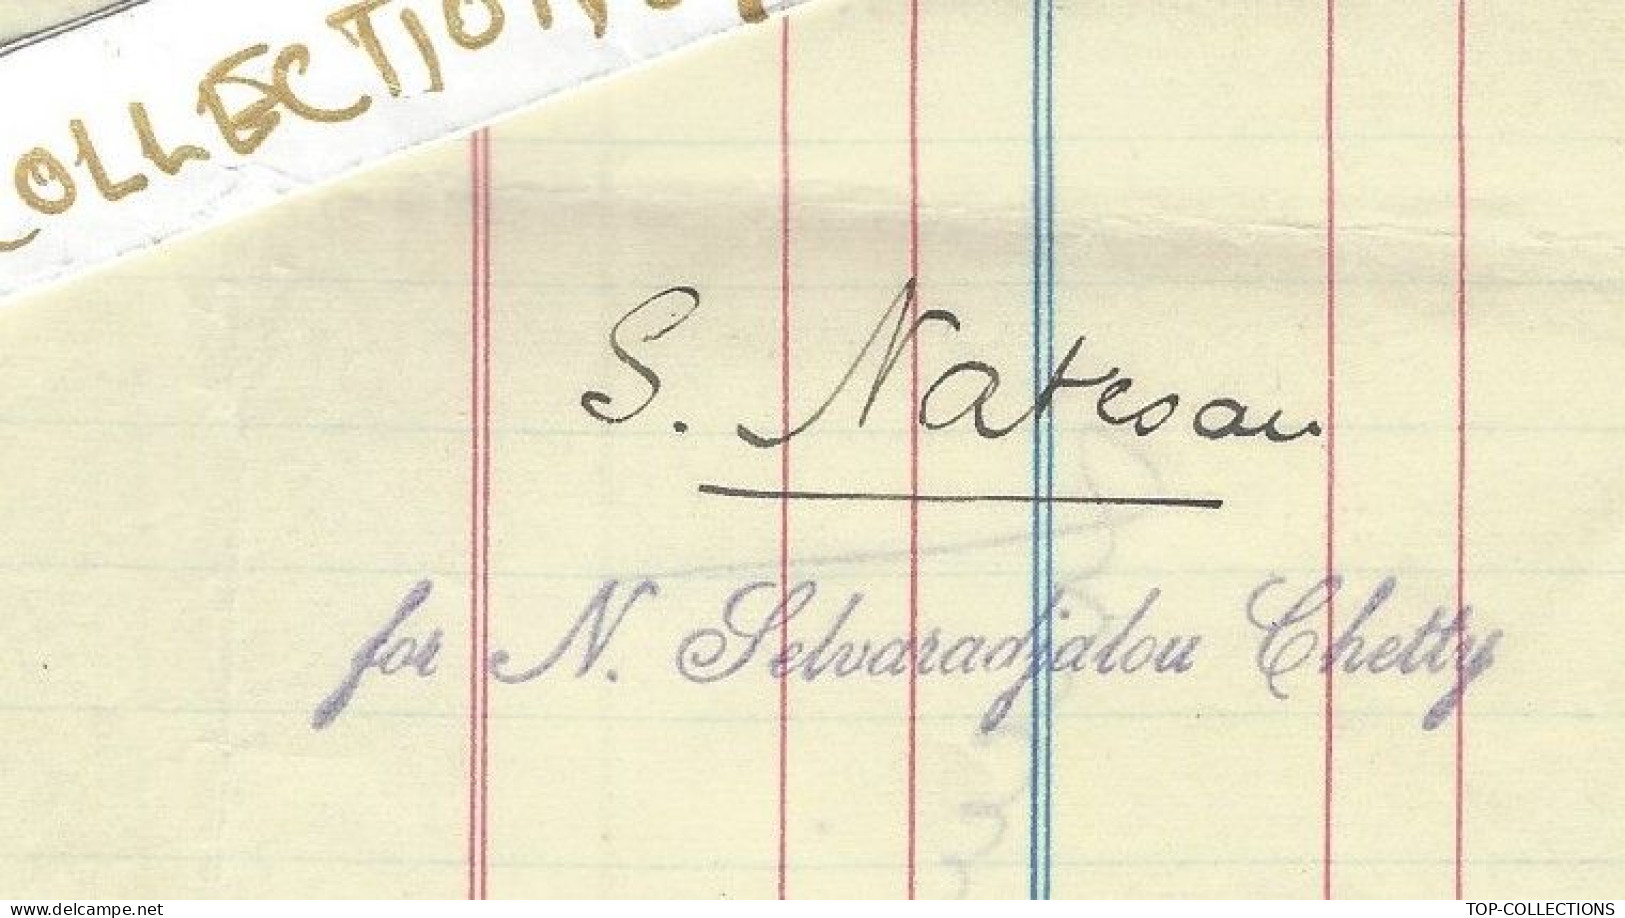 1930 NAVIGATION COMMERCE CHAMPAGNE Messageries Maritimes > INDE Pondichery Selvaradjalou Shipping Contract. VAPEUR Rohna - 1900 – 1949